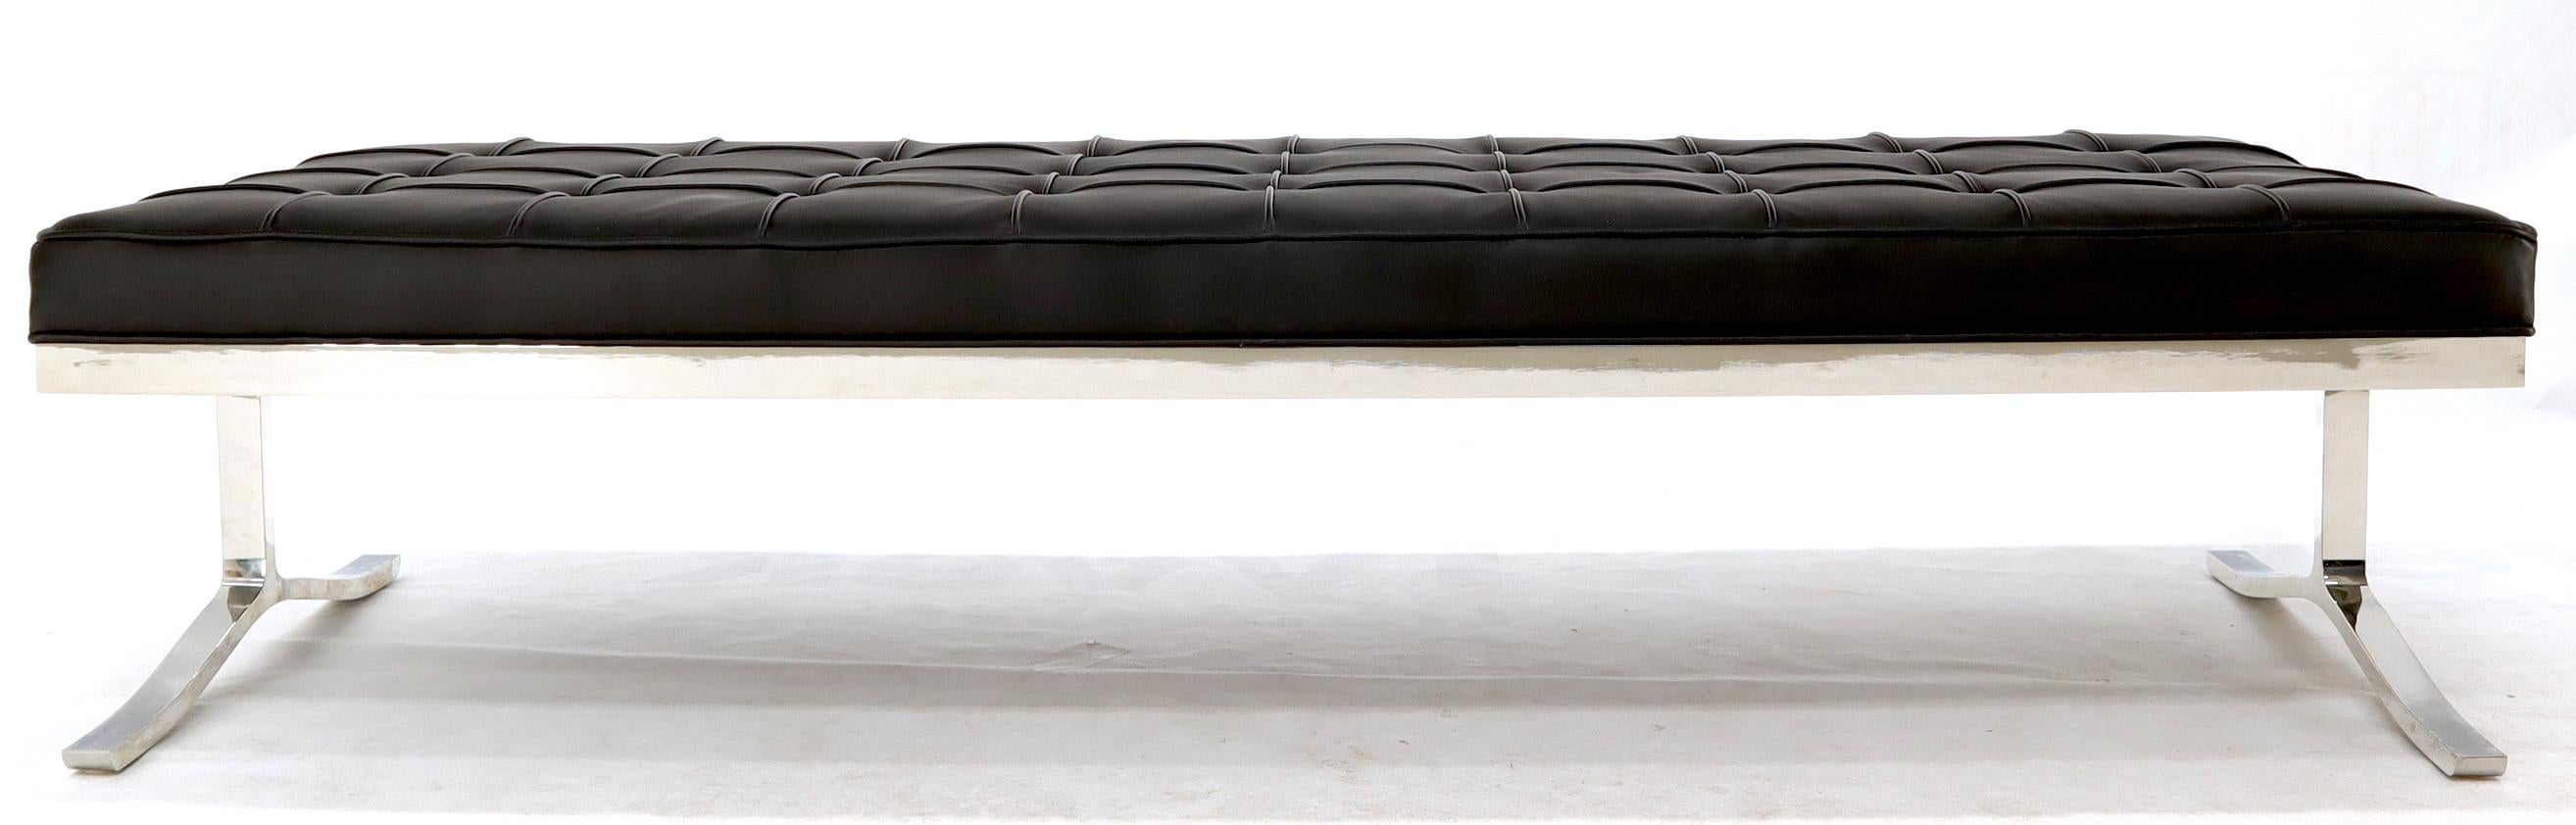 American Nico Zographos Chrome and Leather Large Bench Extra Wide Daybed